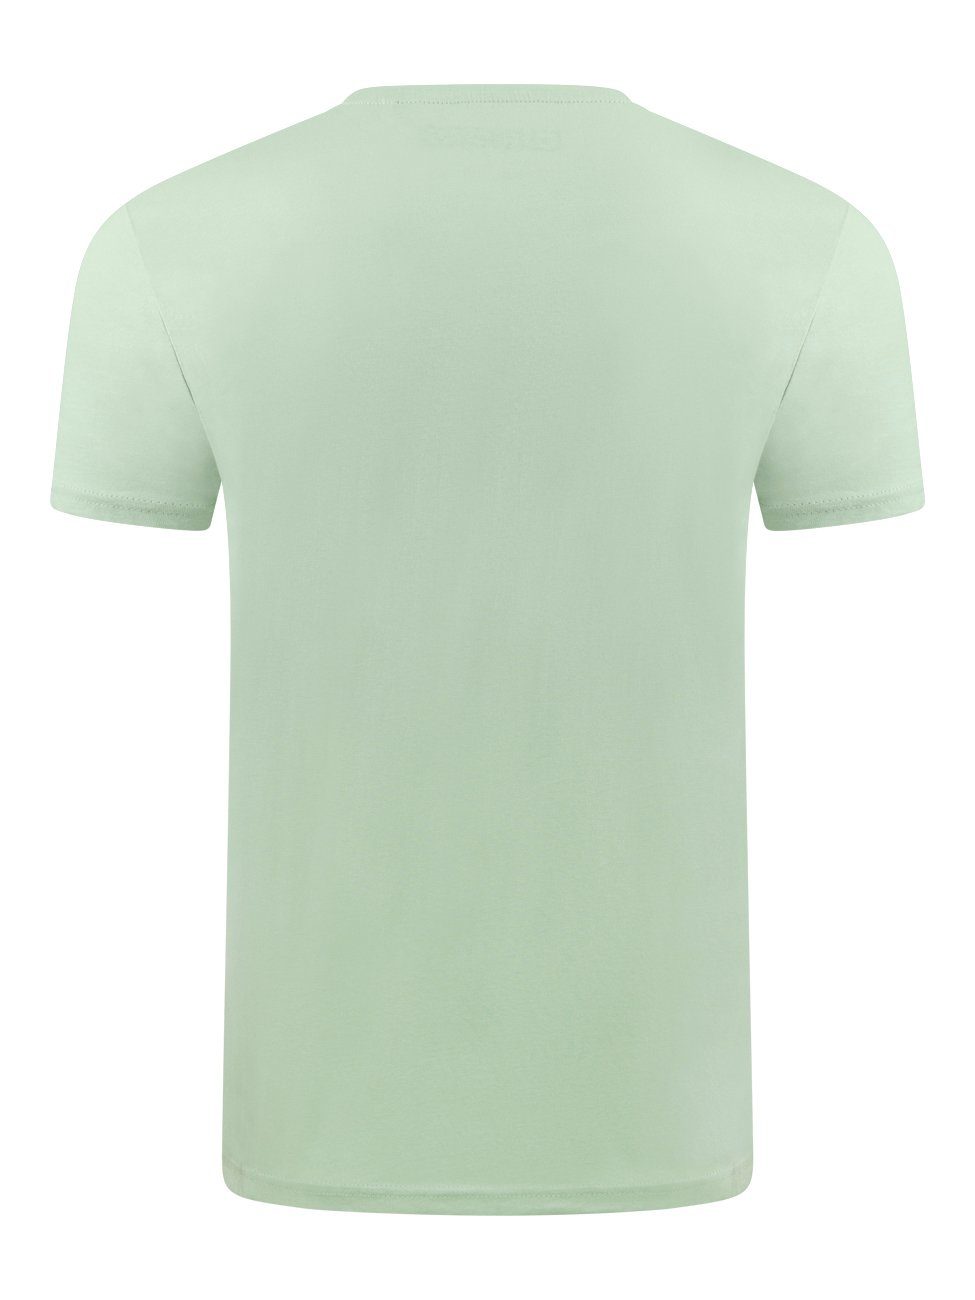 T-Shirt Baumwolle aus Green (1-tlg) Middle (12300) riverso O-Neck 100% RIVAaron